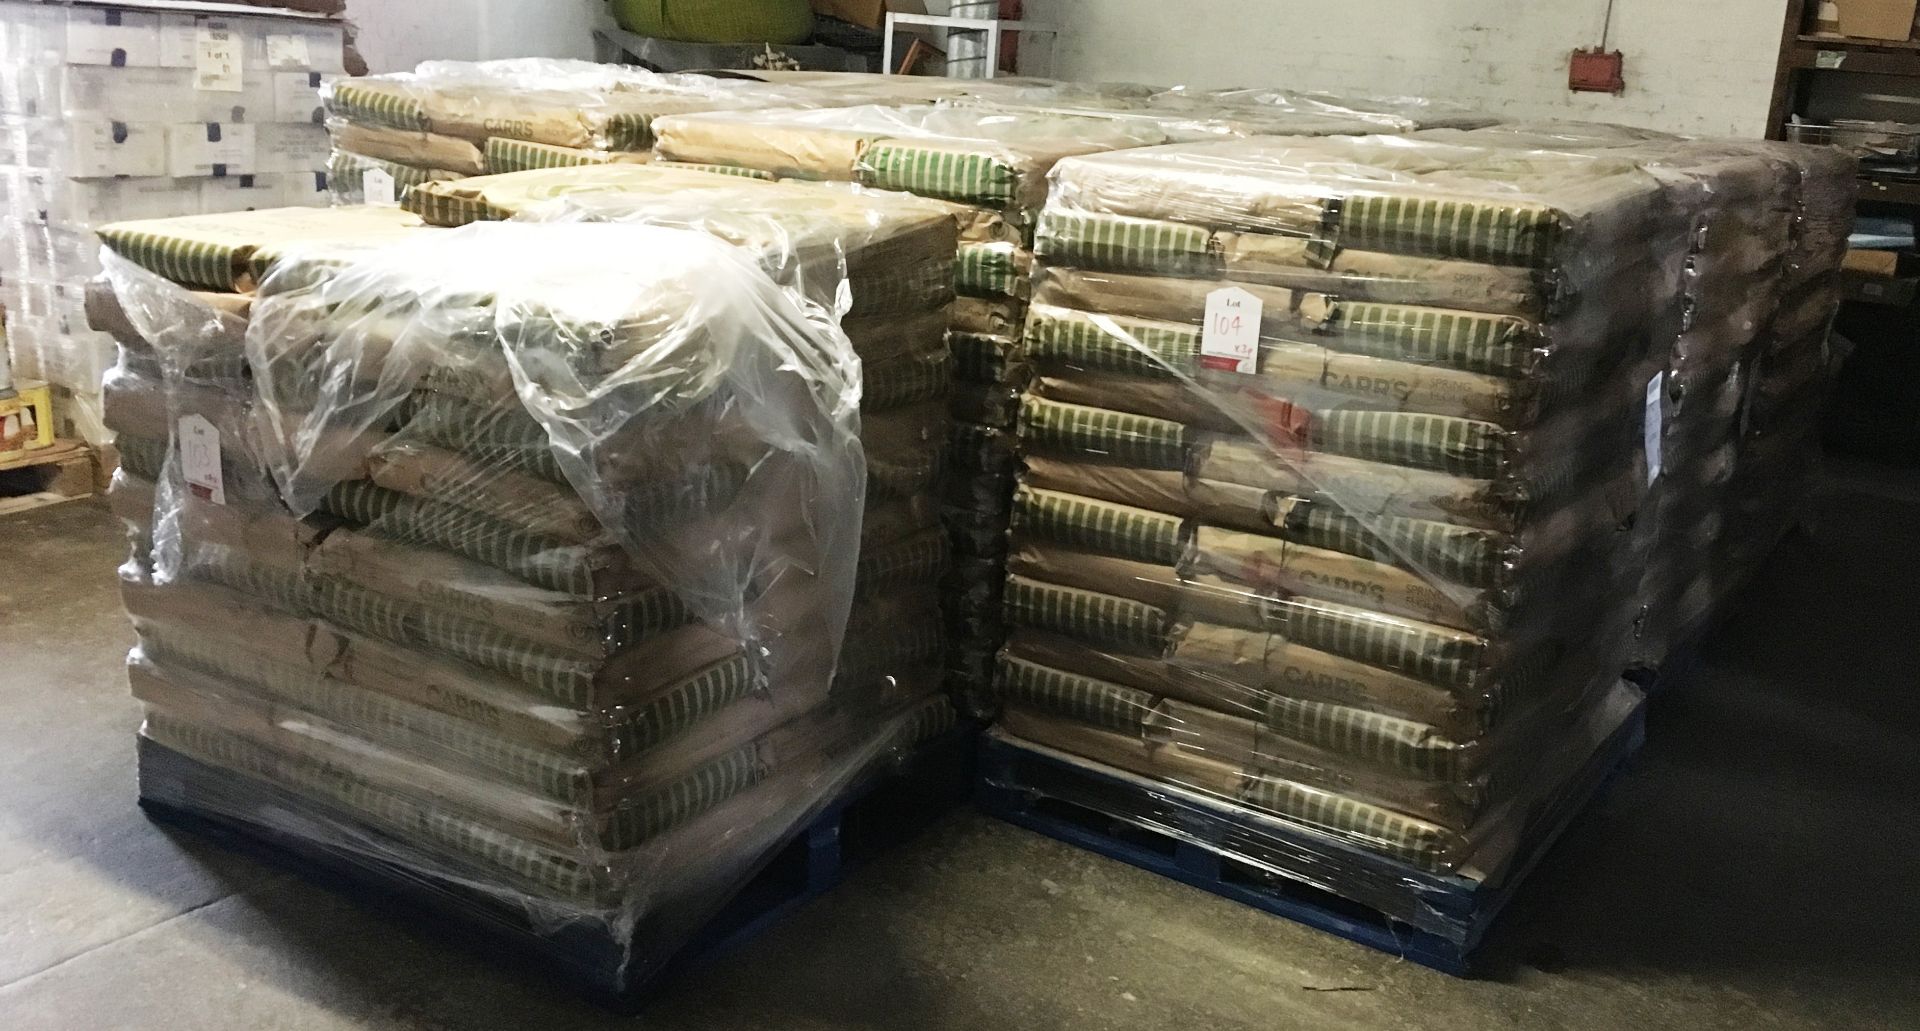 4 x Pallets of Carrs Spring Flour - Approximately 65 Bags per Pallet